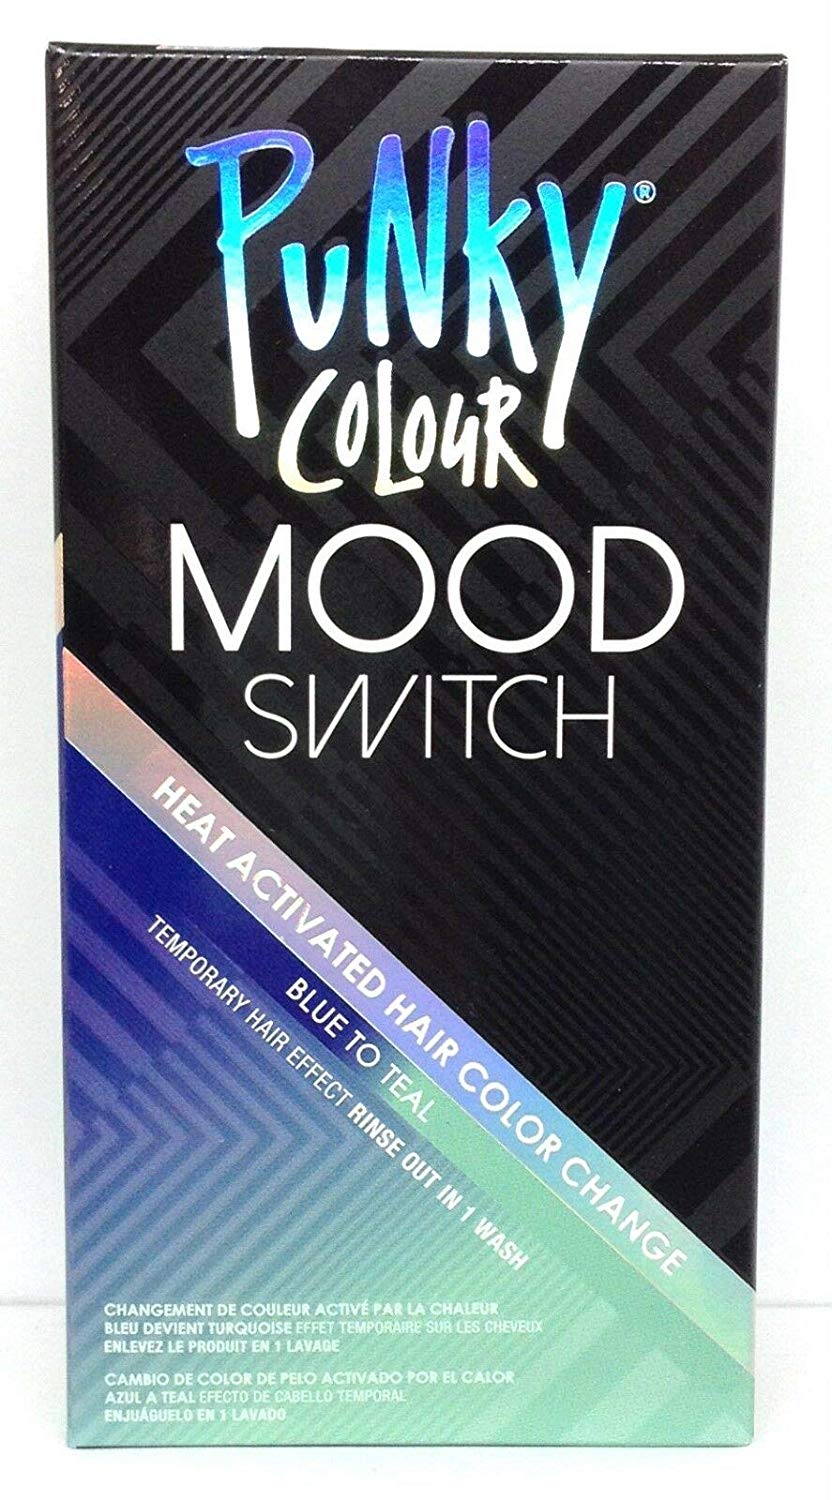 Punky Colour Mood Switch - Blue to Teal